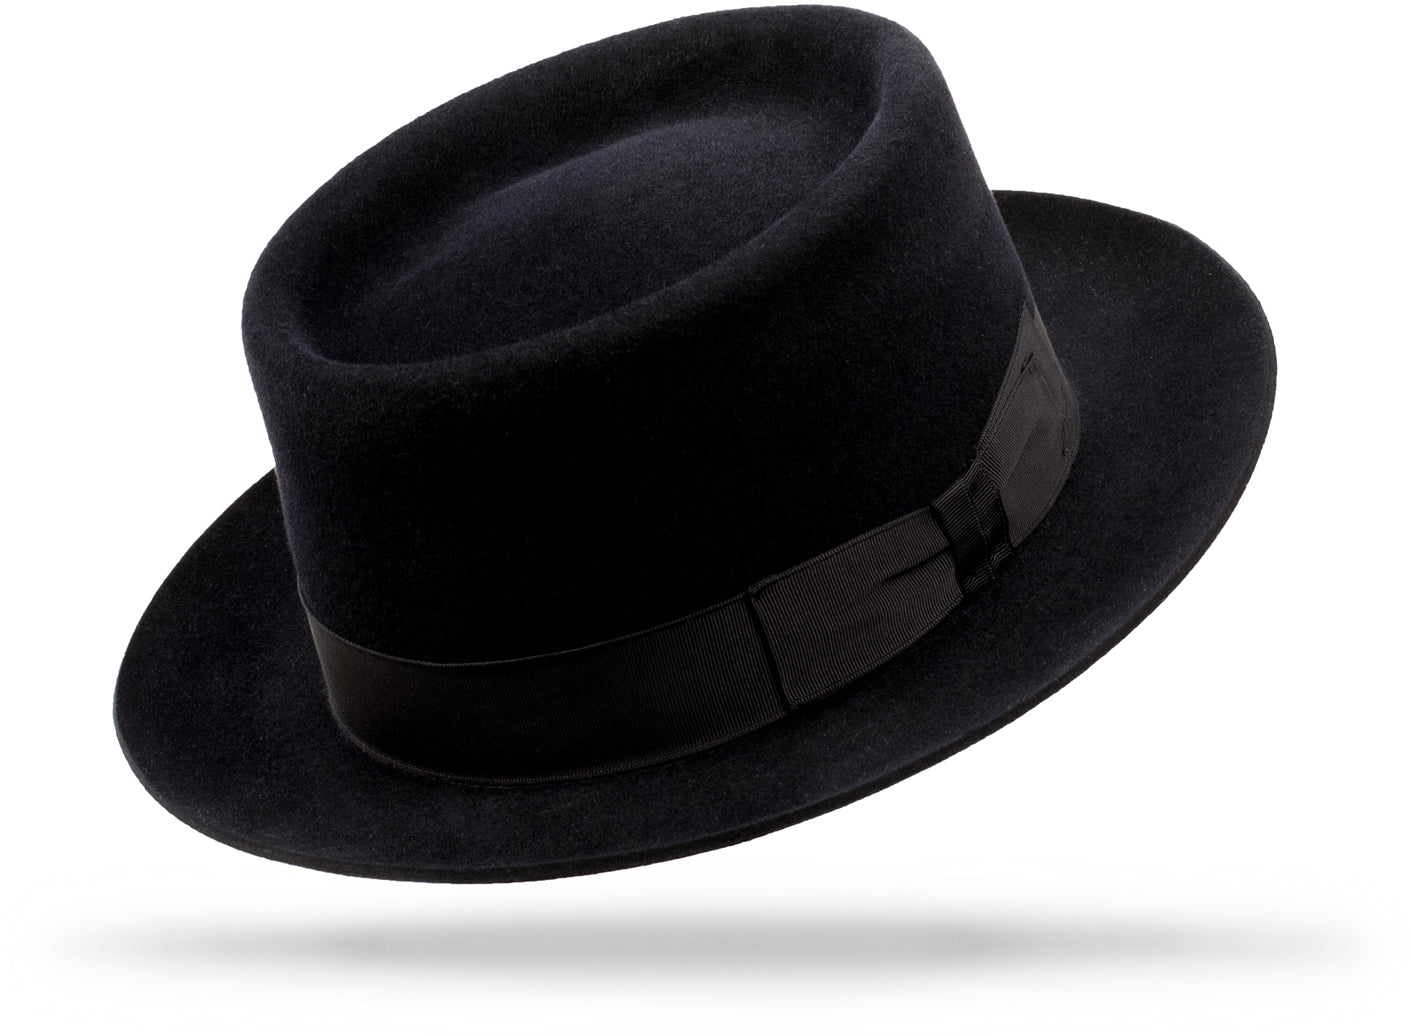 Design
A handcrafted felt porkpie design that is simple and classical.
Material
100% Hare Fur Felt sustainably acquired
Specifications
100% Hare Fur Felt. 3 1/2” crown and 2 1/4” brim that possesses a smart snap in the front. Comes standard with a 1 black band. Handcrafted in our NYC Atelier.